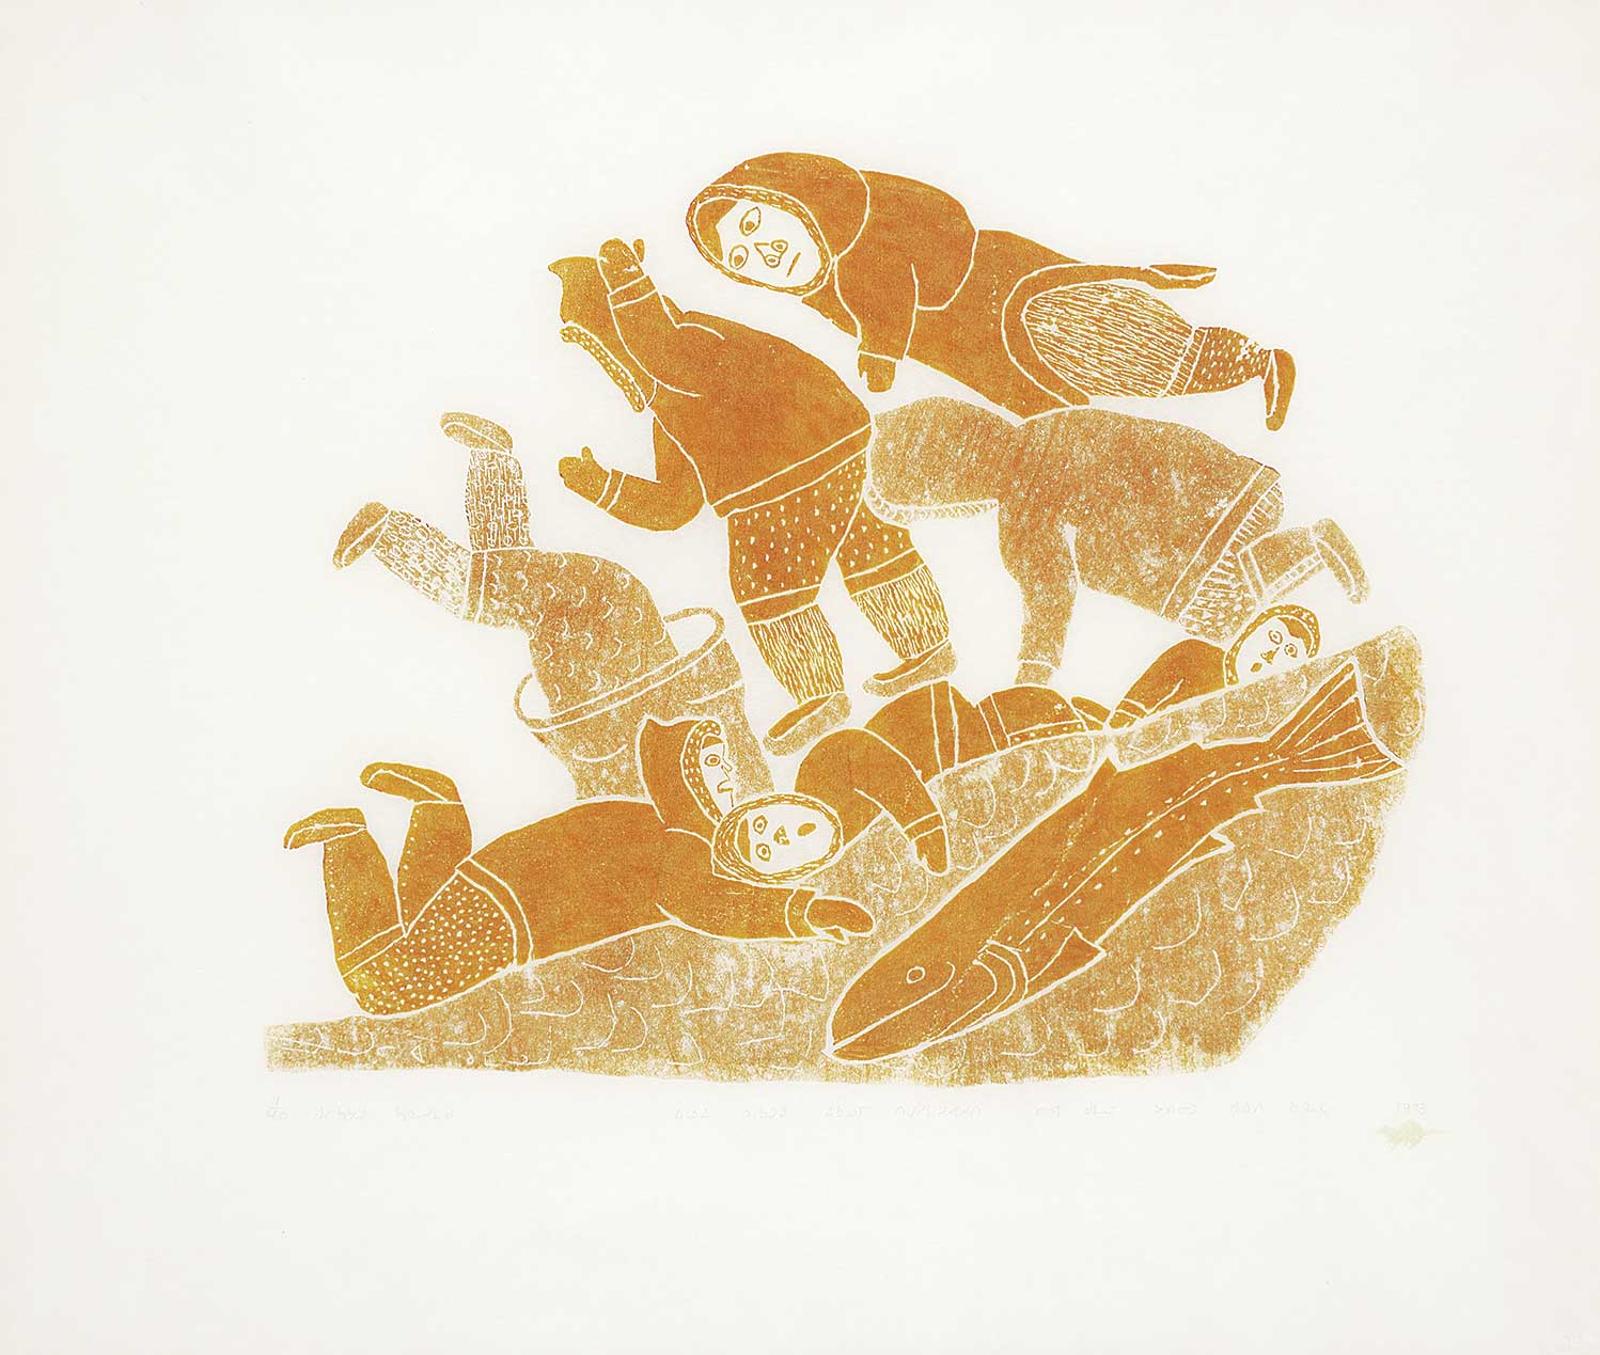 School [Barnabus Arnasungaaq] Inuit - Inuit Falling Into the Water Trying to Catch Fish  #11/40